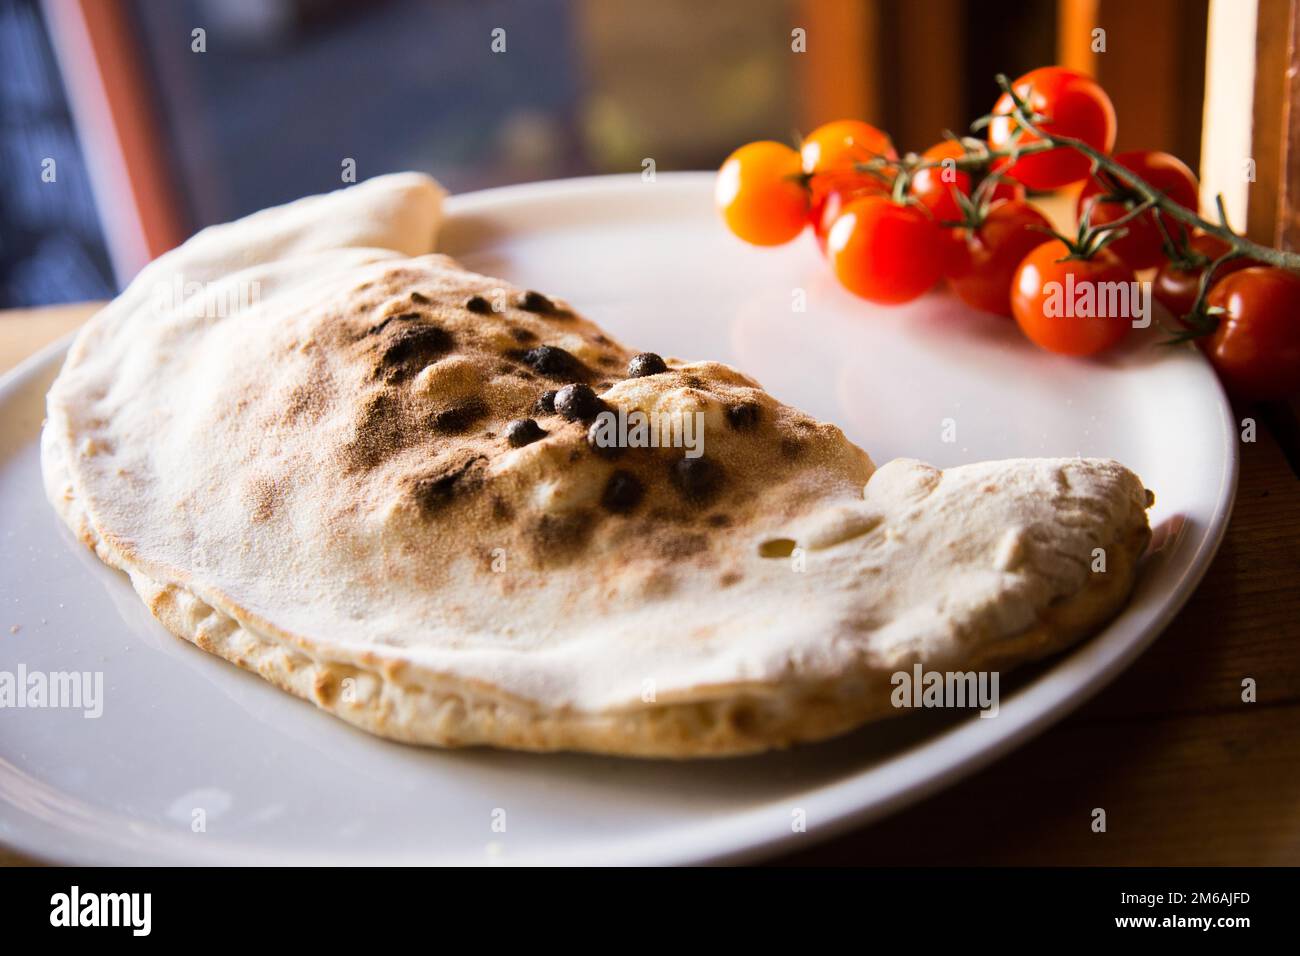 Calzone Pizza. Neapolitan pizza stuffed with cheese, tomato and other ingredients such as meat or vegetables. Authentic Italian recipe. Stock Photo